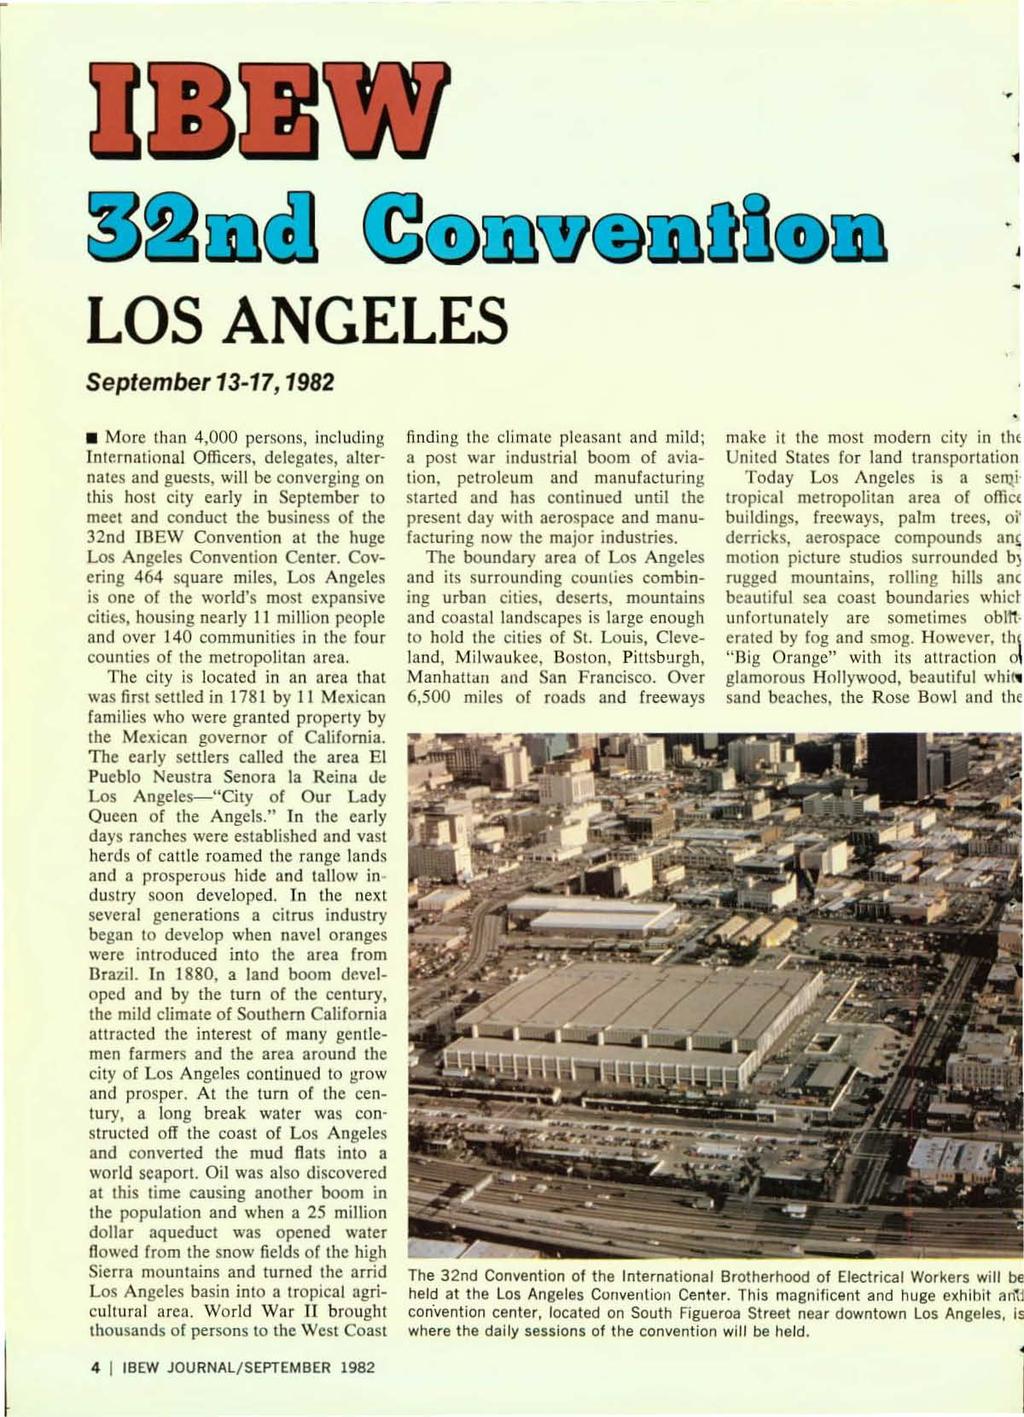 , LOS ANGELES September 13-17, 1982 More Ihan 4,000 persons, including International Officers, delegates, alternates and guesls, will be converging on this host city early in September to meet and